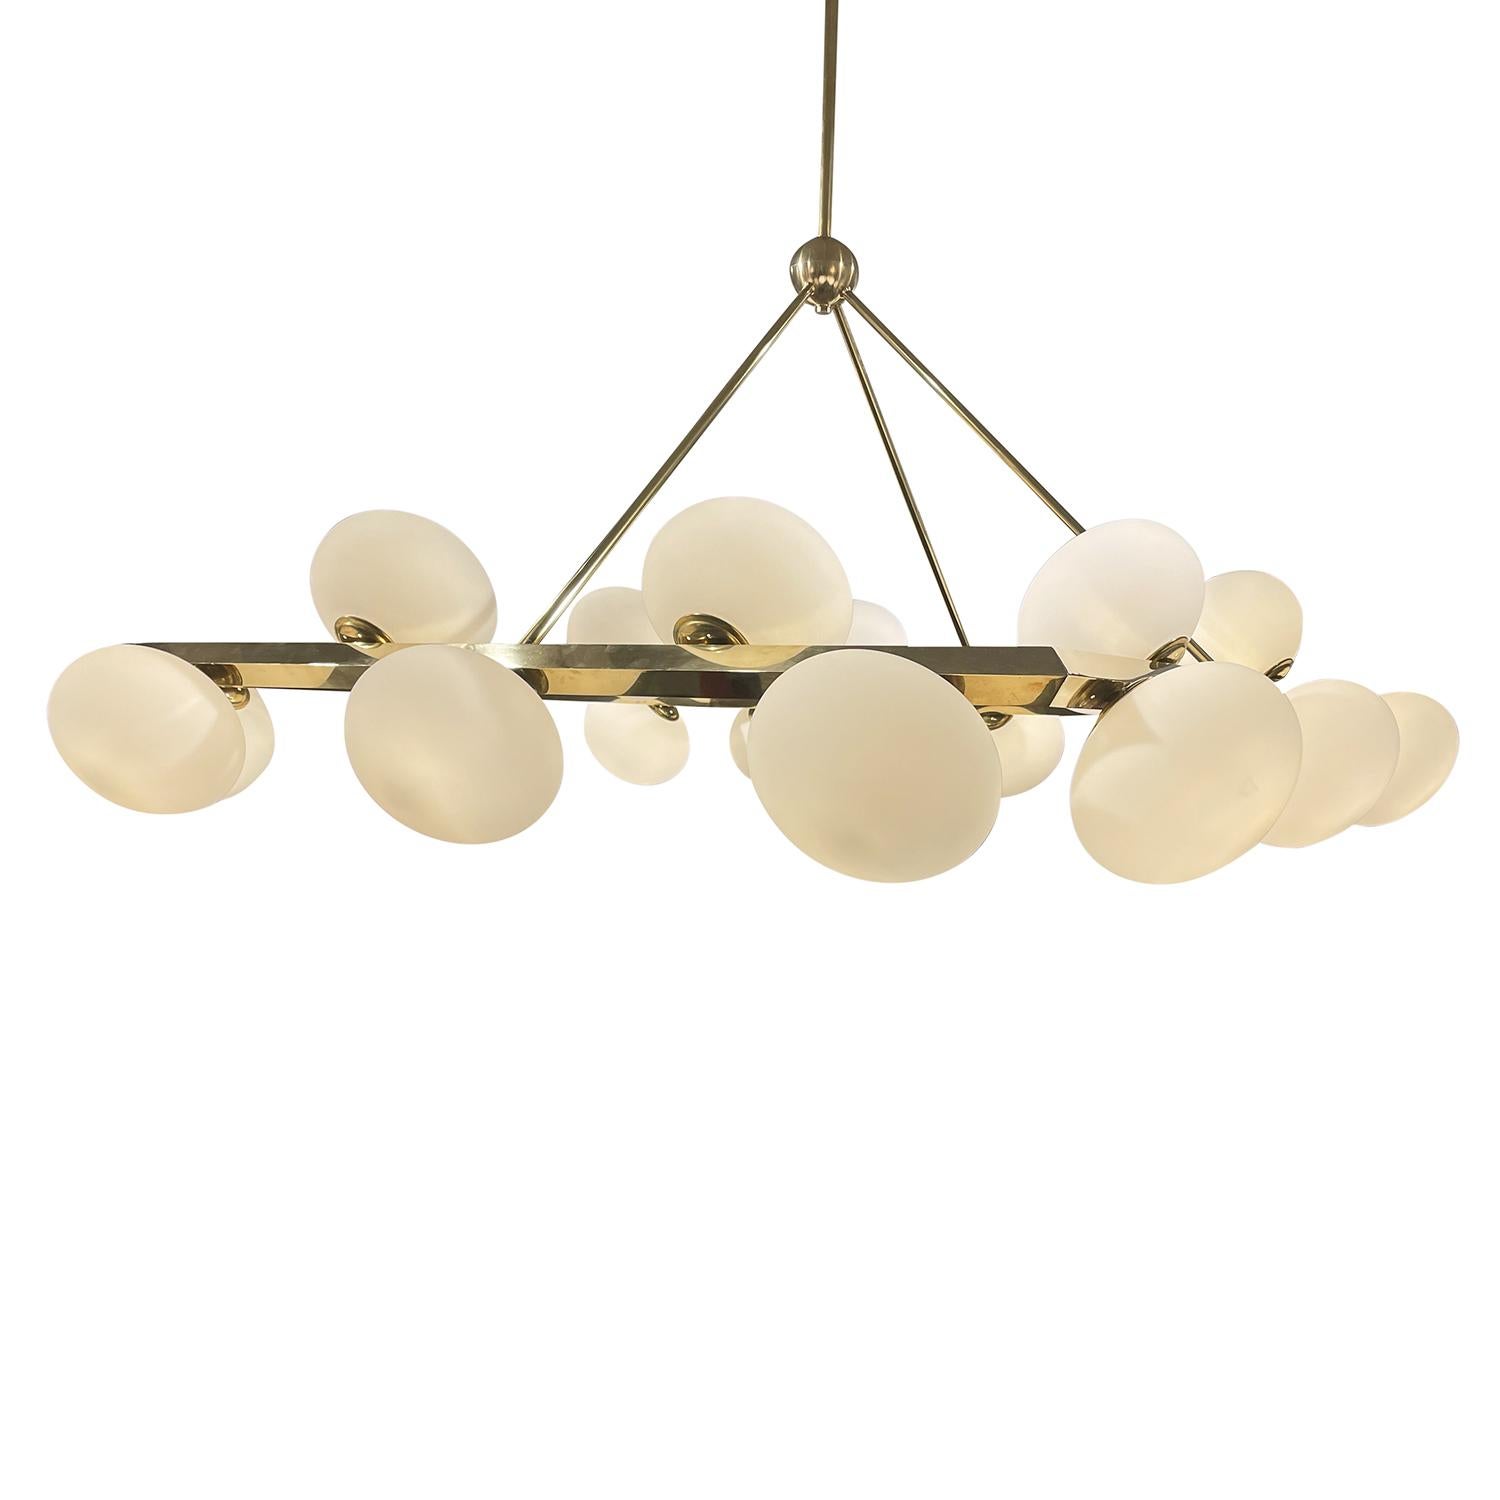 Mid-Century Modern 20th Century Italian Square Opaline Glass Chandelier in the Style of Stilnovo For Sale